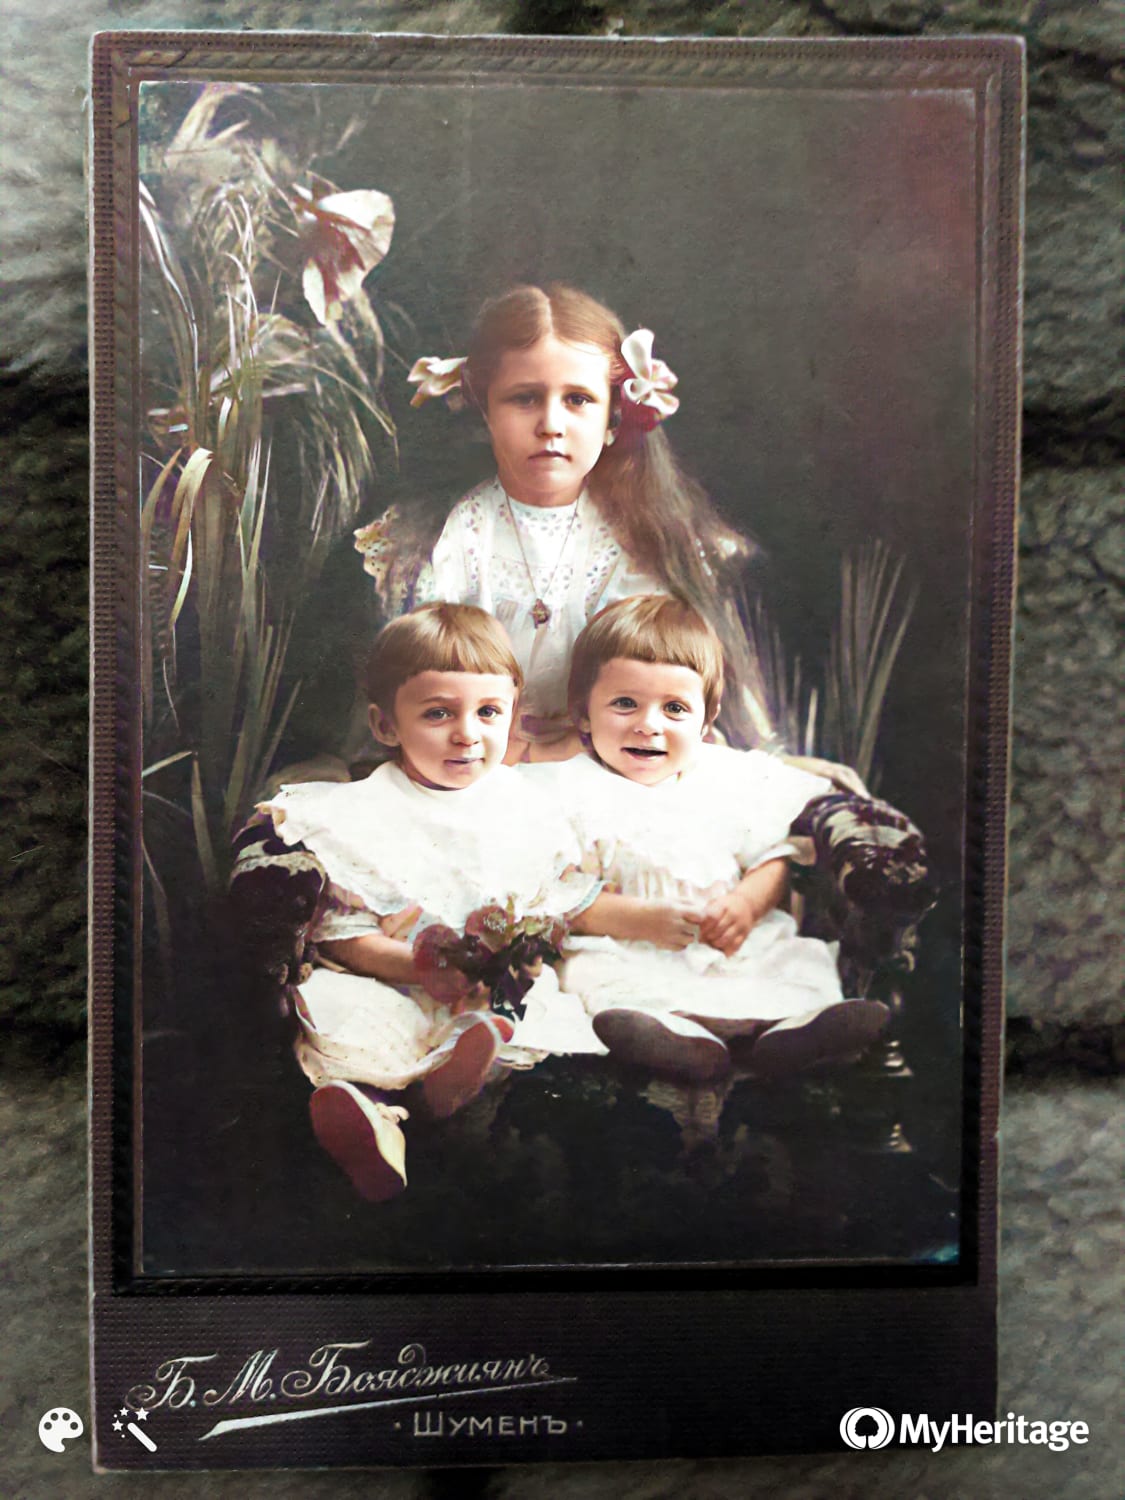 My great-grandmother and her twin brothers (ca 1905)